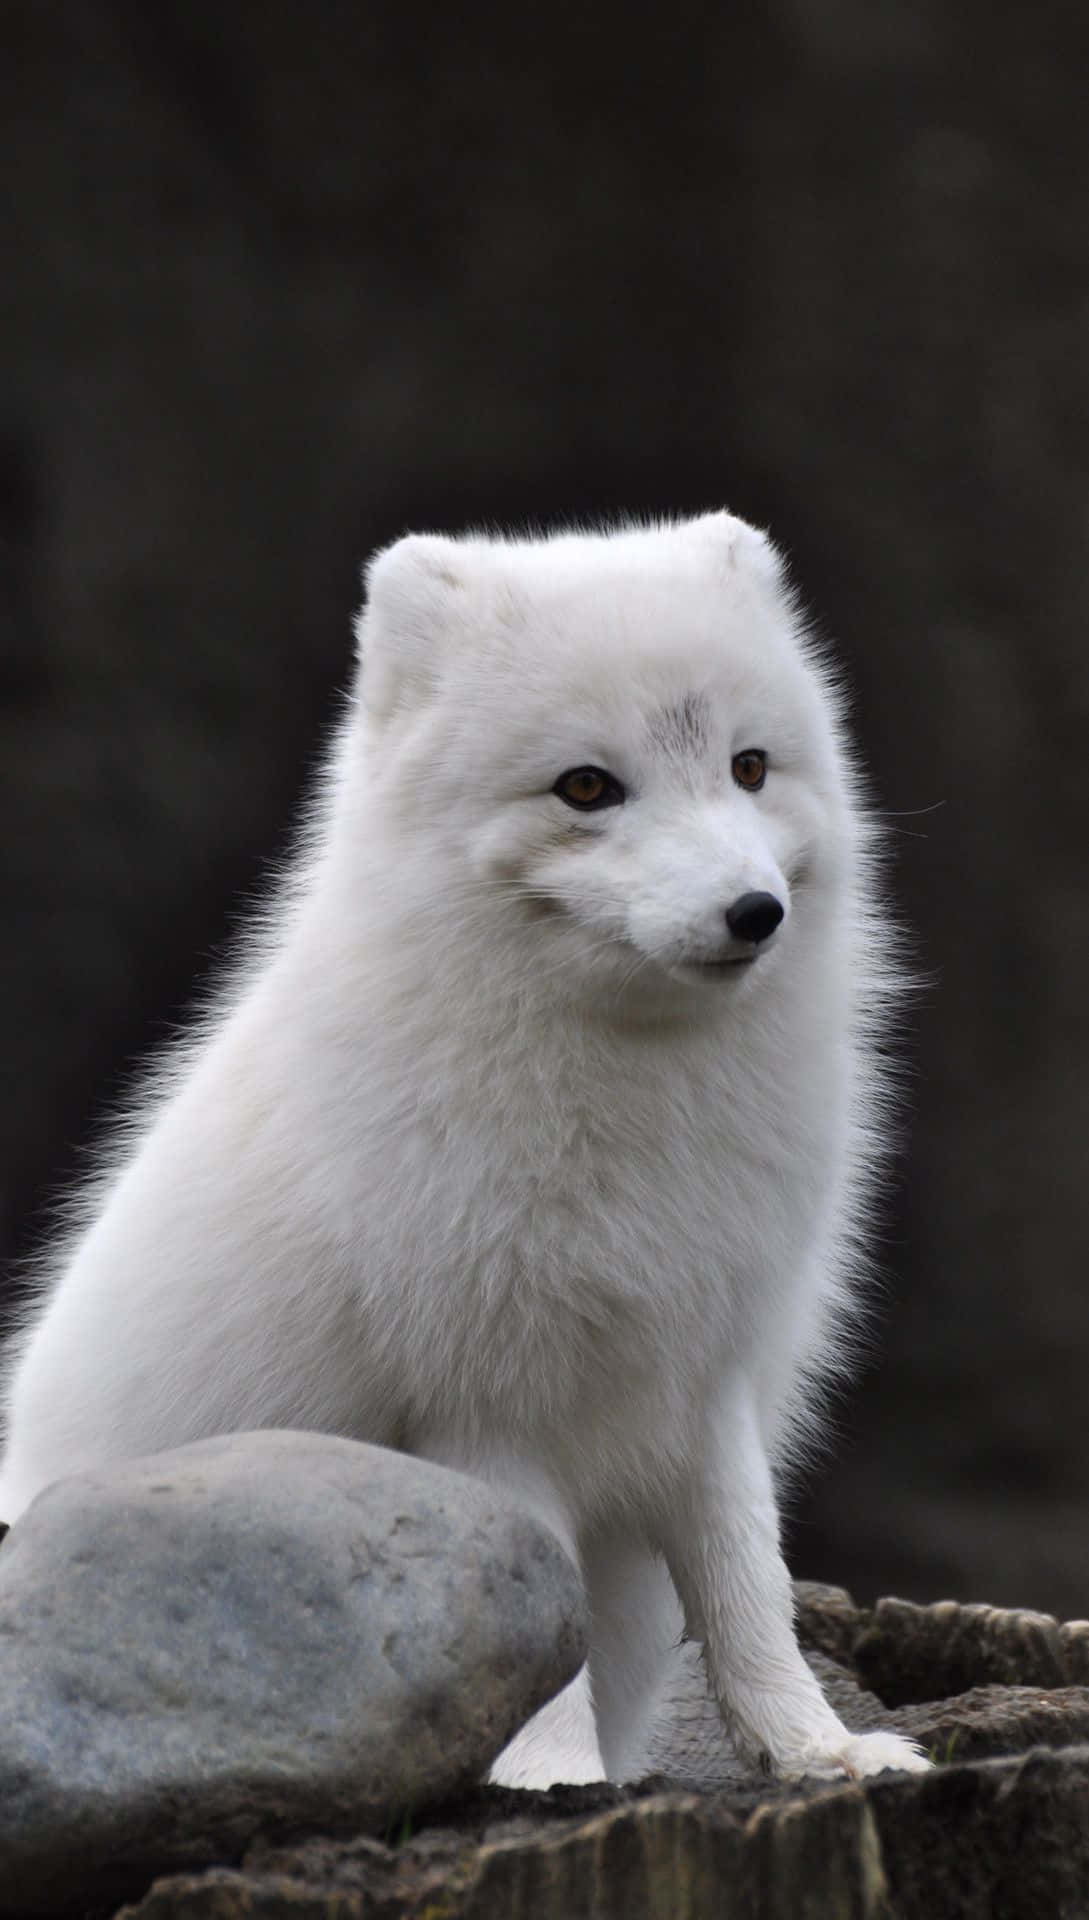 A majestic arctic fox standing in the snow